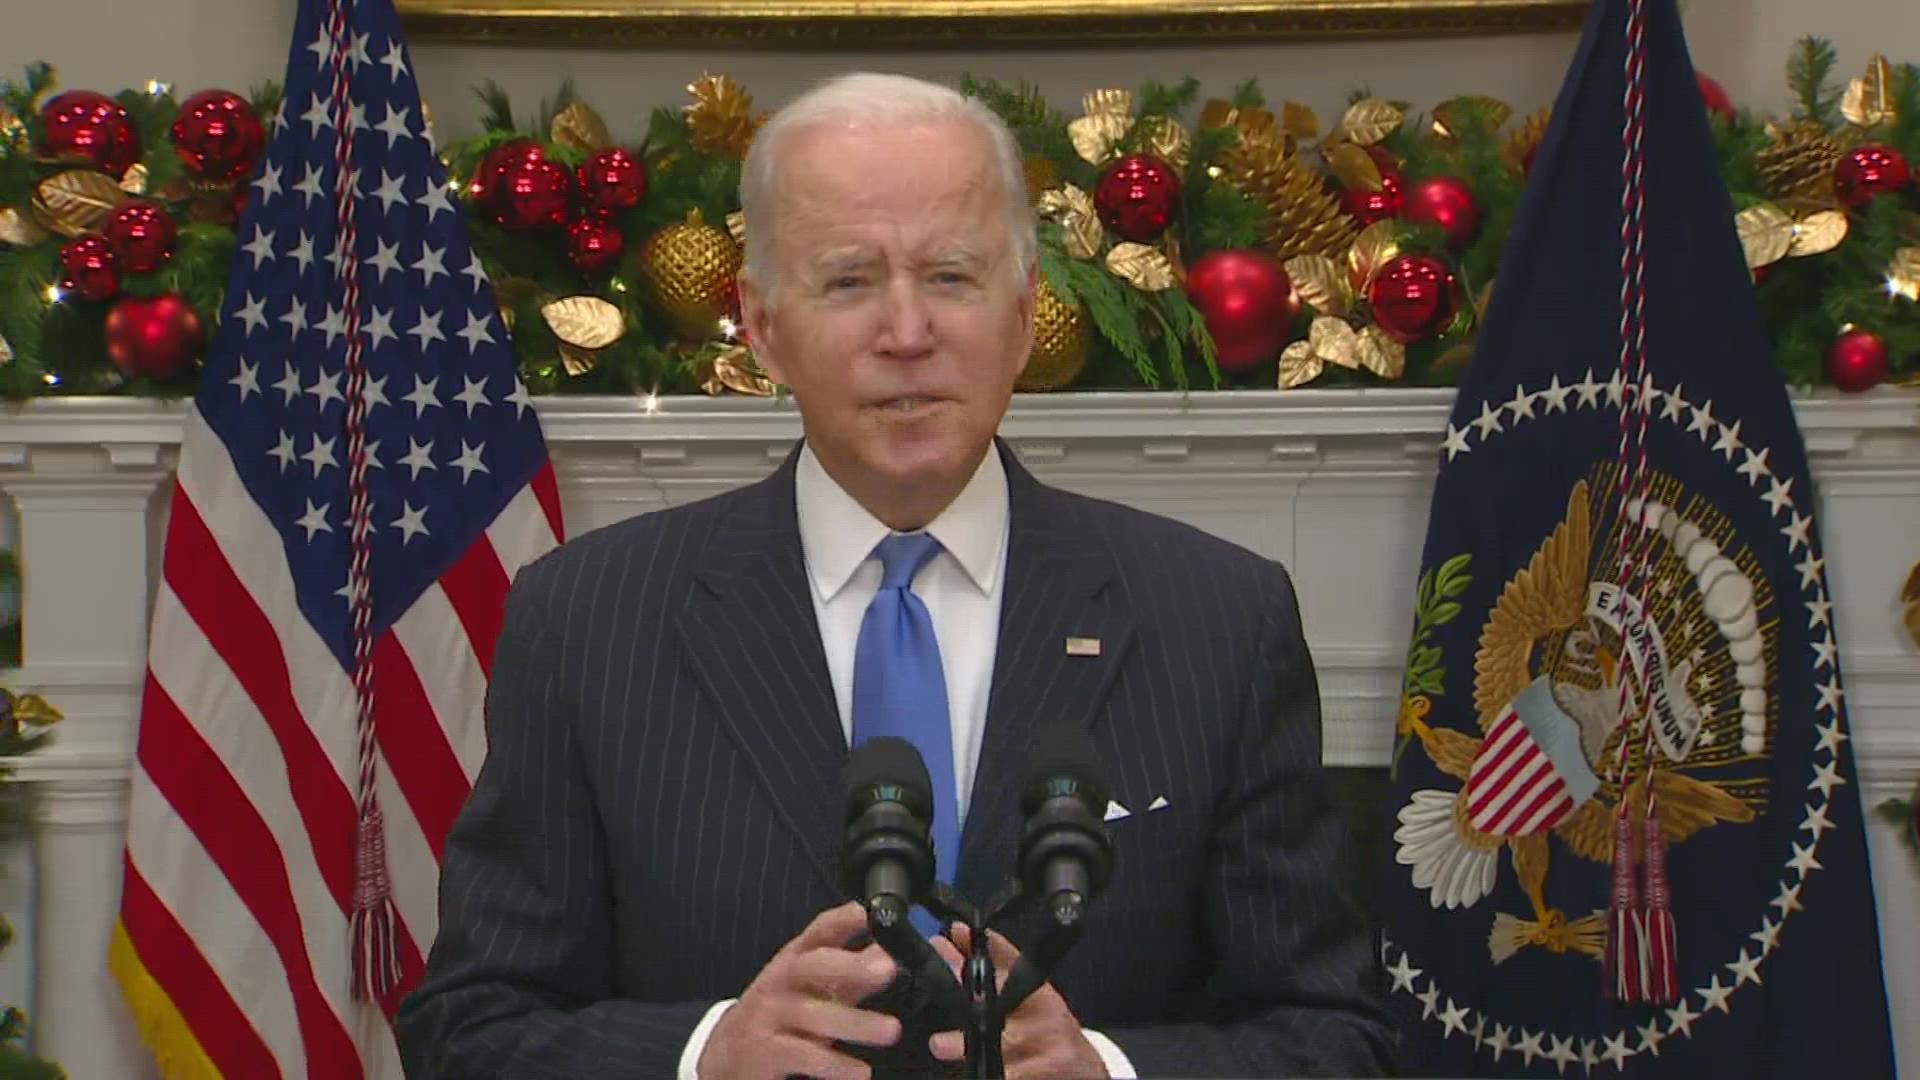 President Joe Biden is urging Americans to get vaccinated including booster shots as he seeks to quell concerns Monday over the new COVID-19 variant.